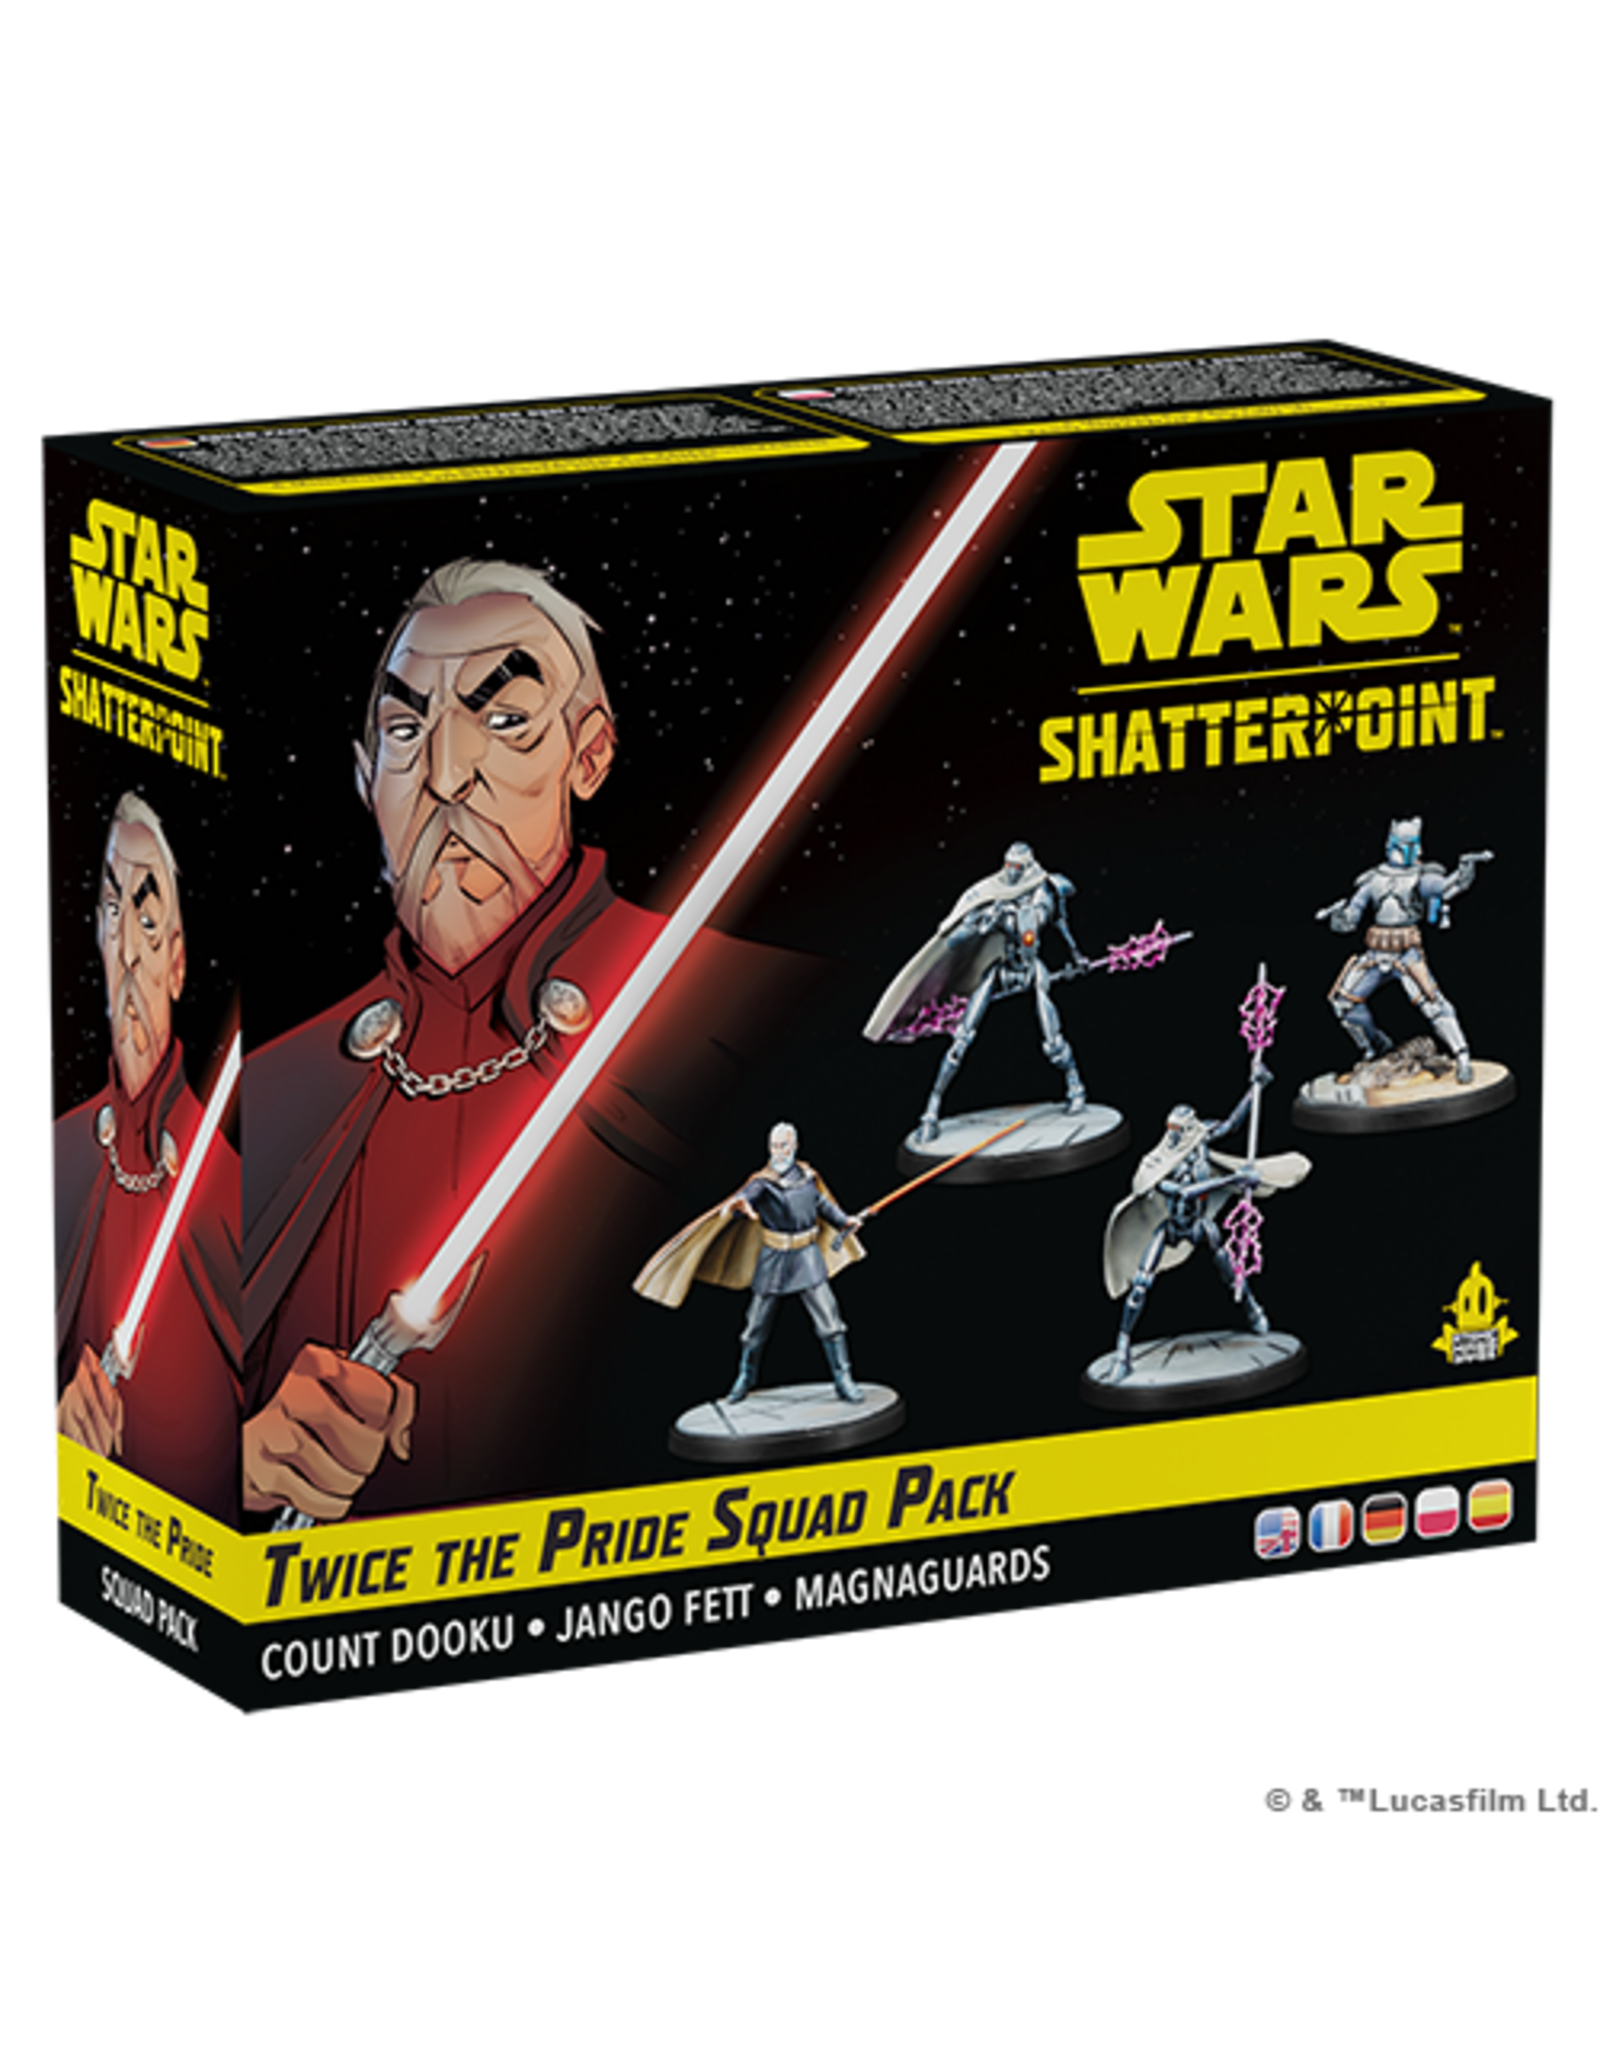 Star Wars Shatterpoint Twice the Pride Count Dooku Squad Pack